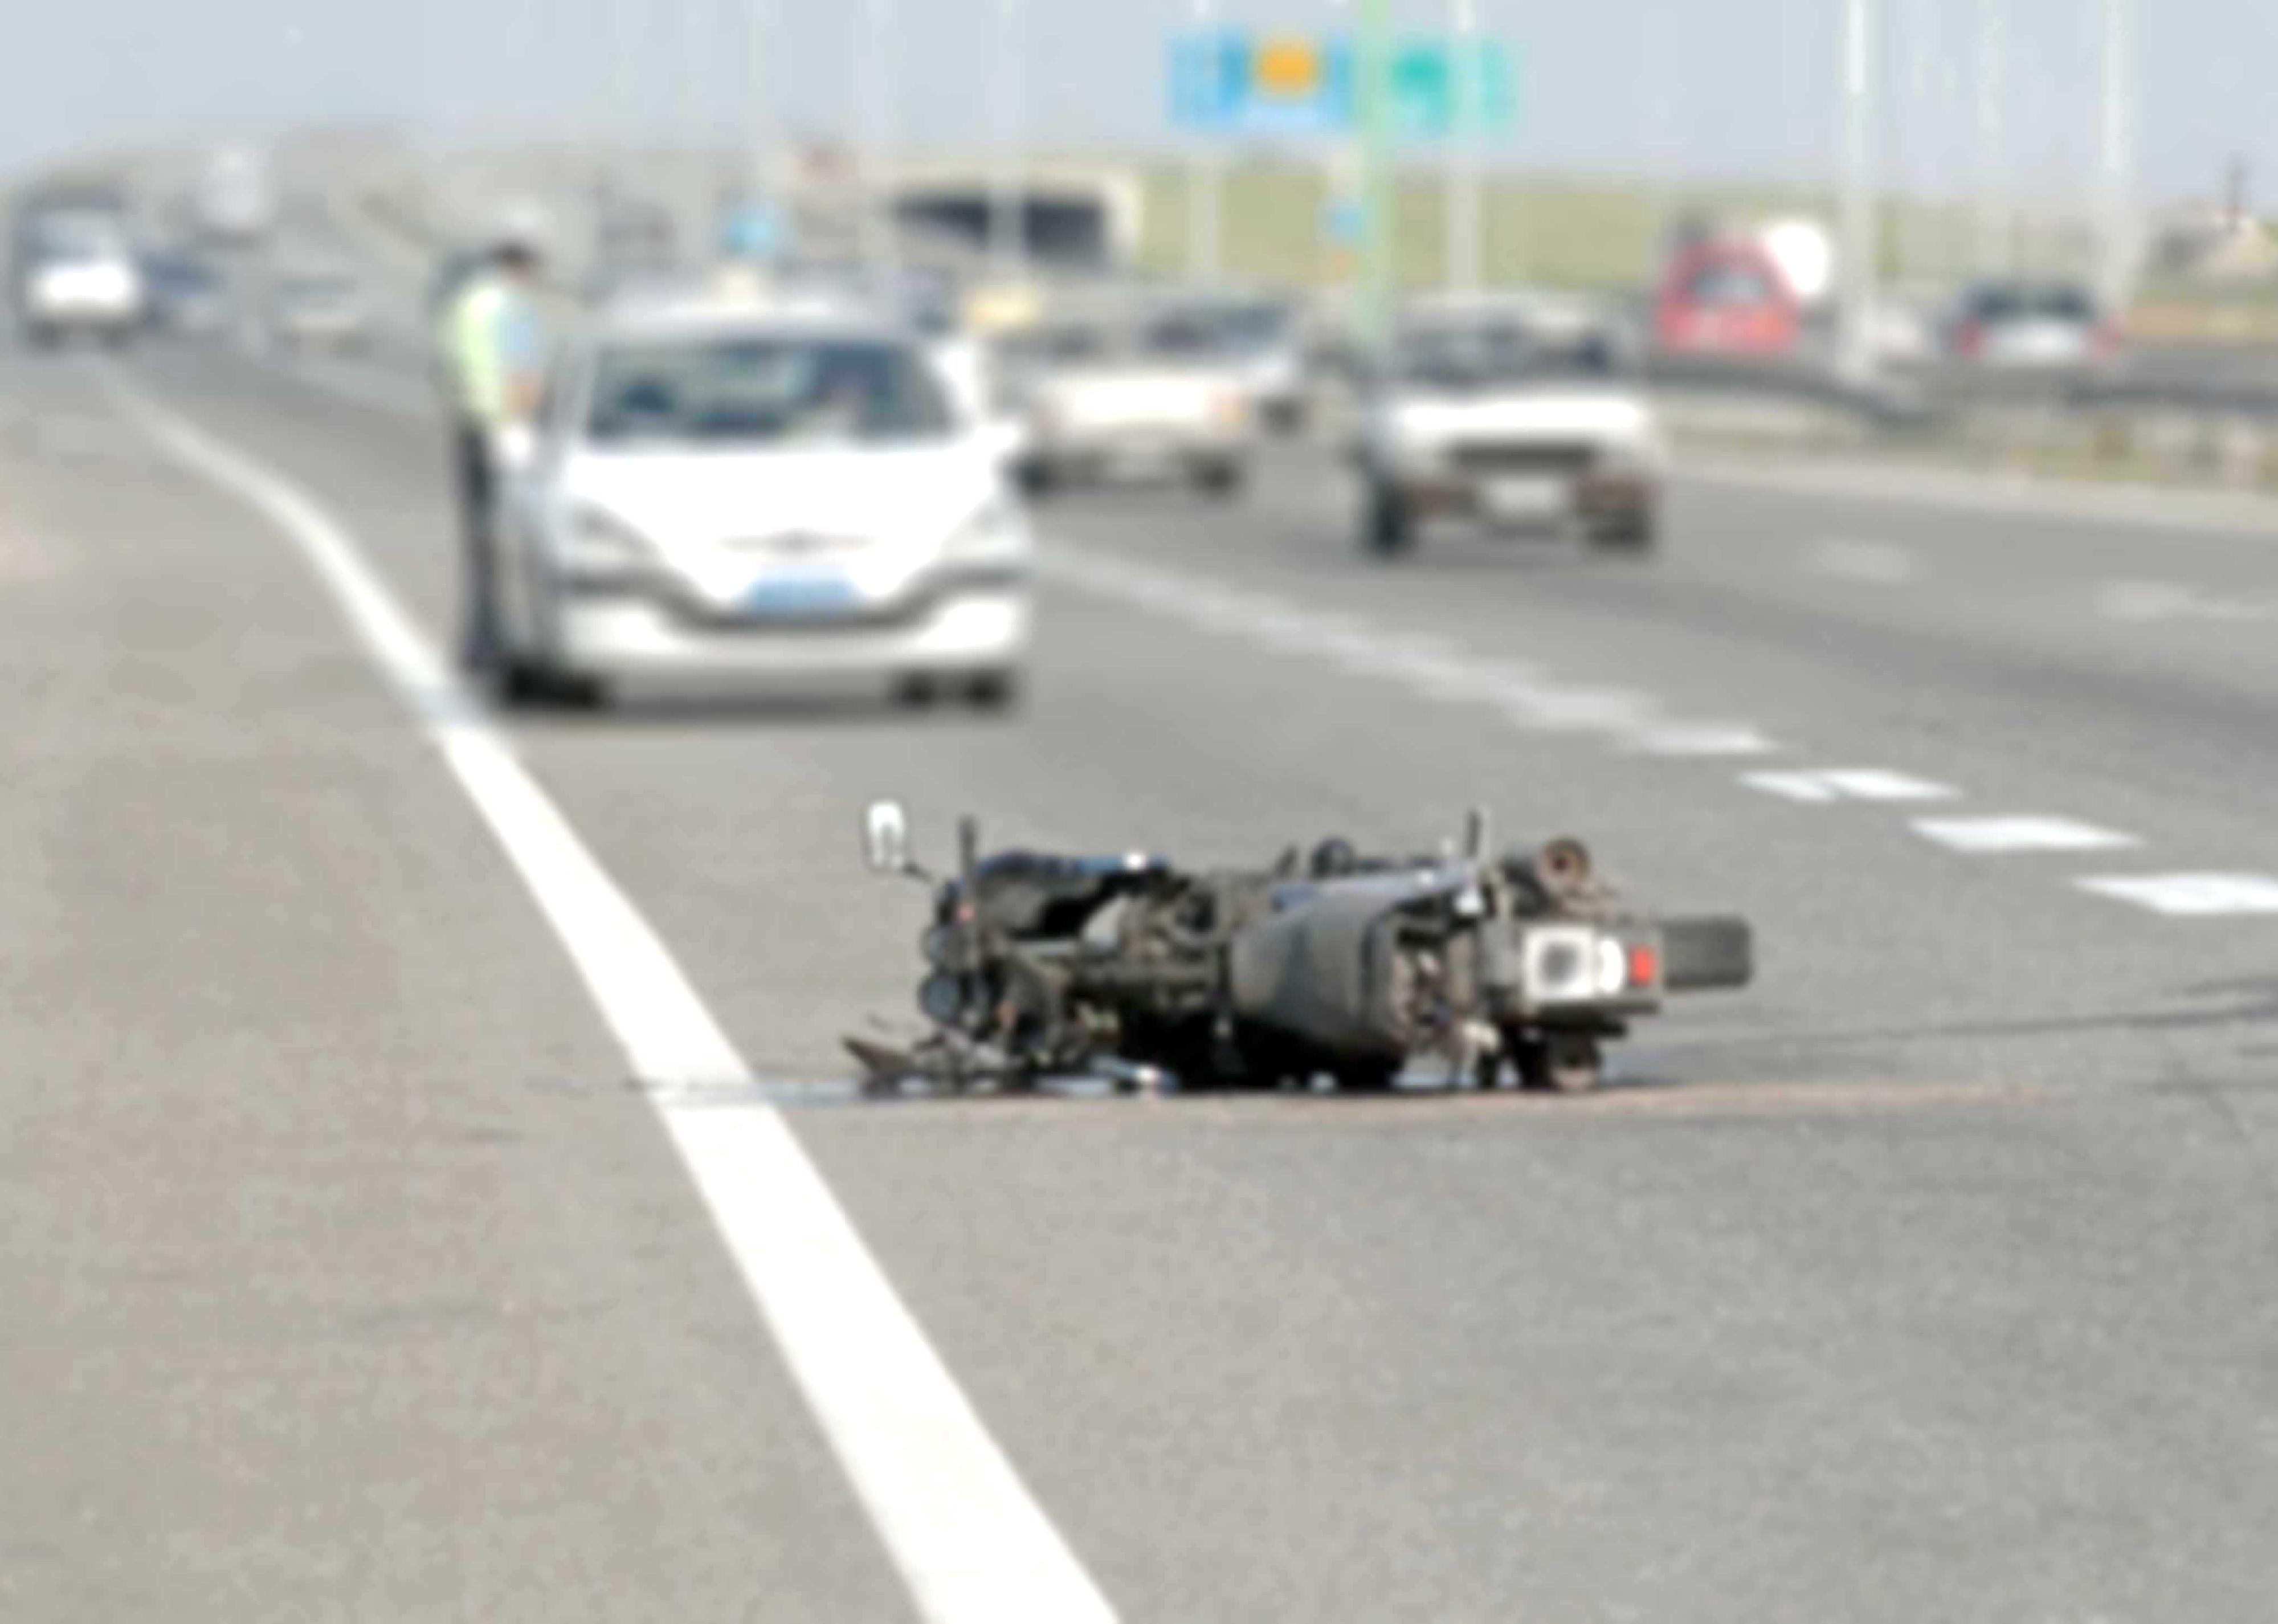 Blurred photo of a motorcyle accident scene.